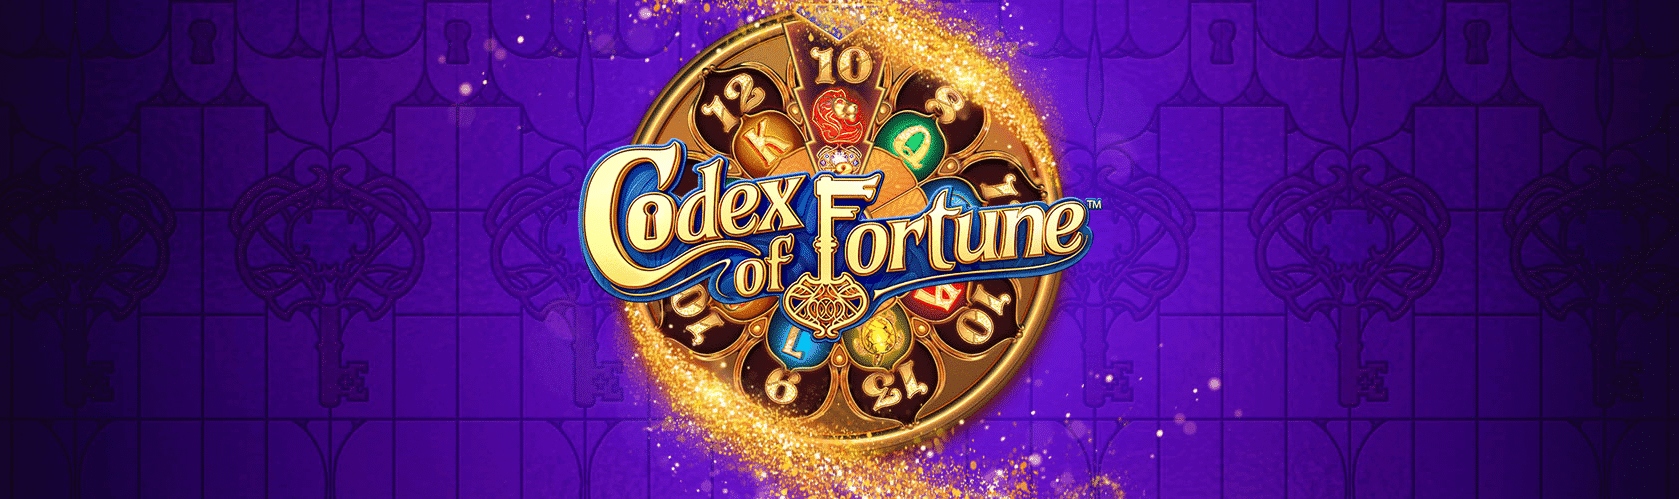 Codex of Fortune slot cover image